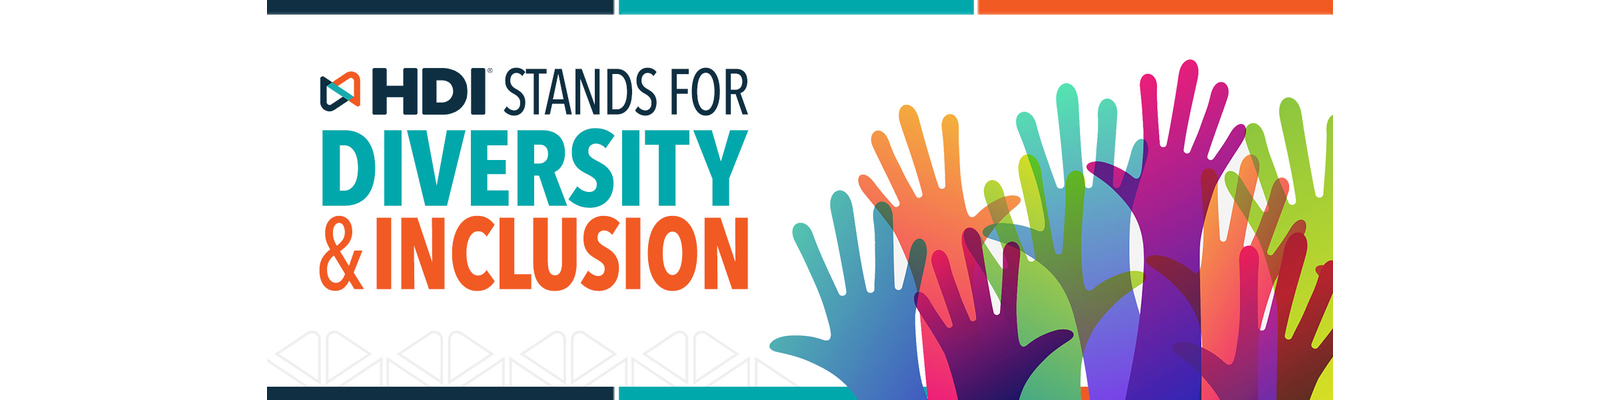 HDI Stands for Diversity & Inclusion.  Click here for more.